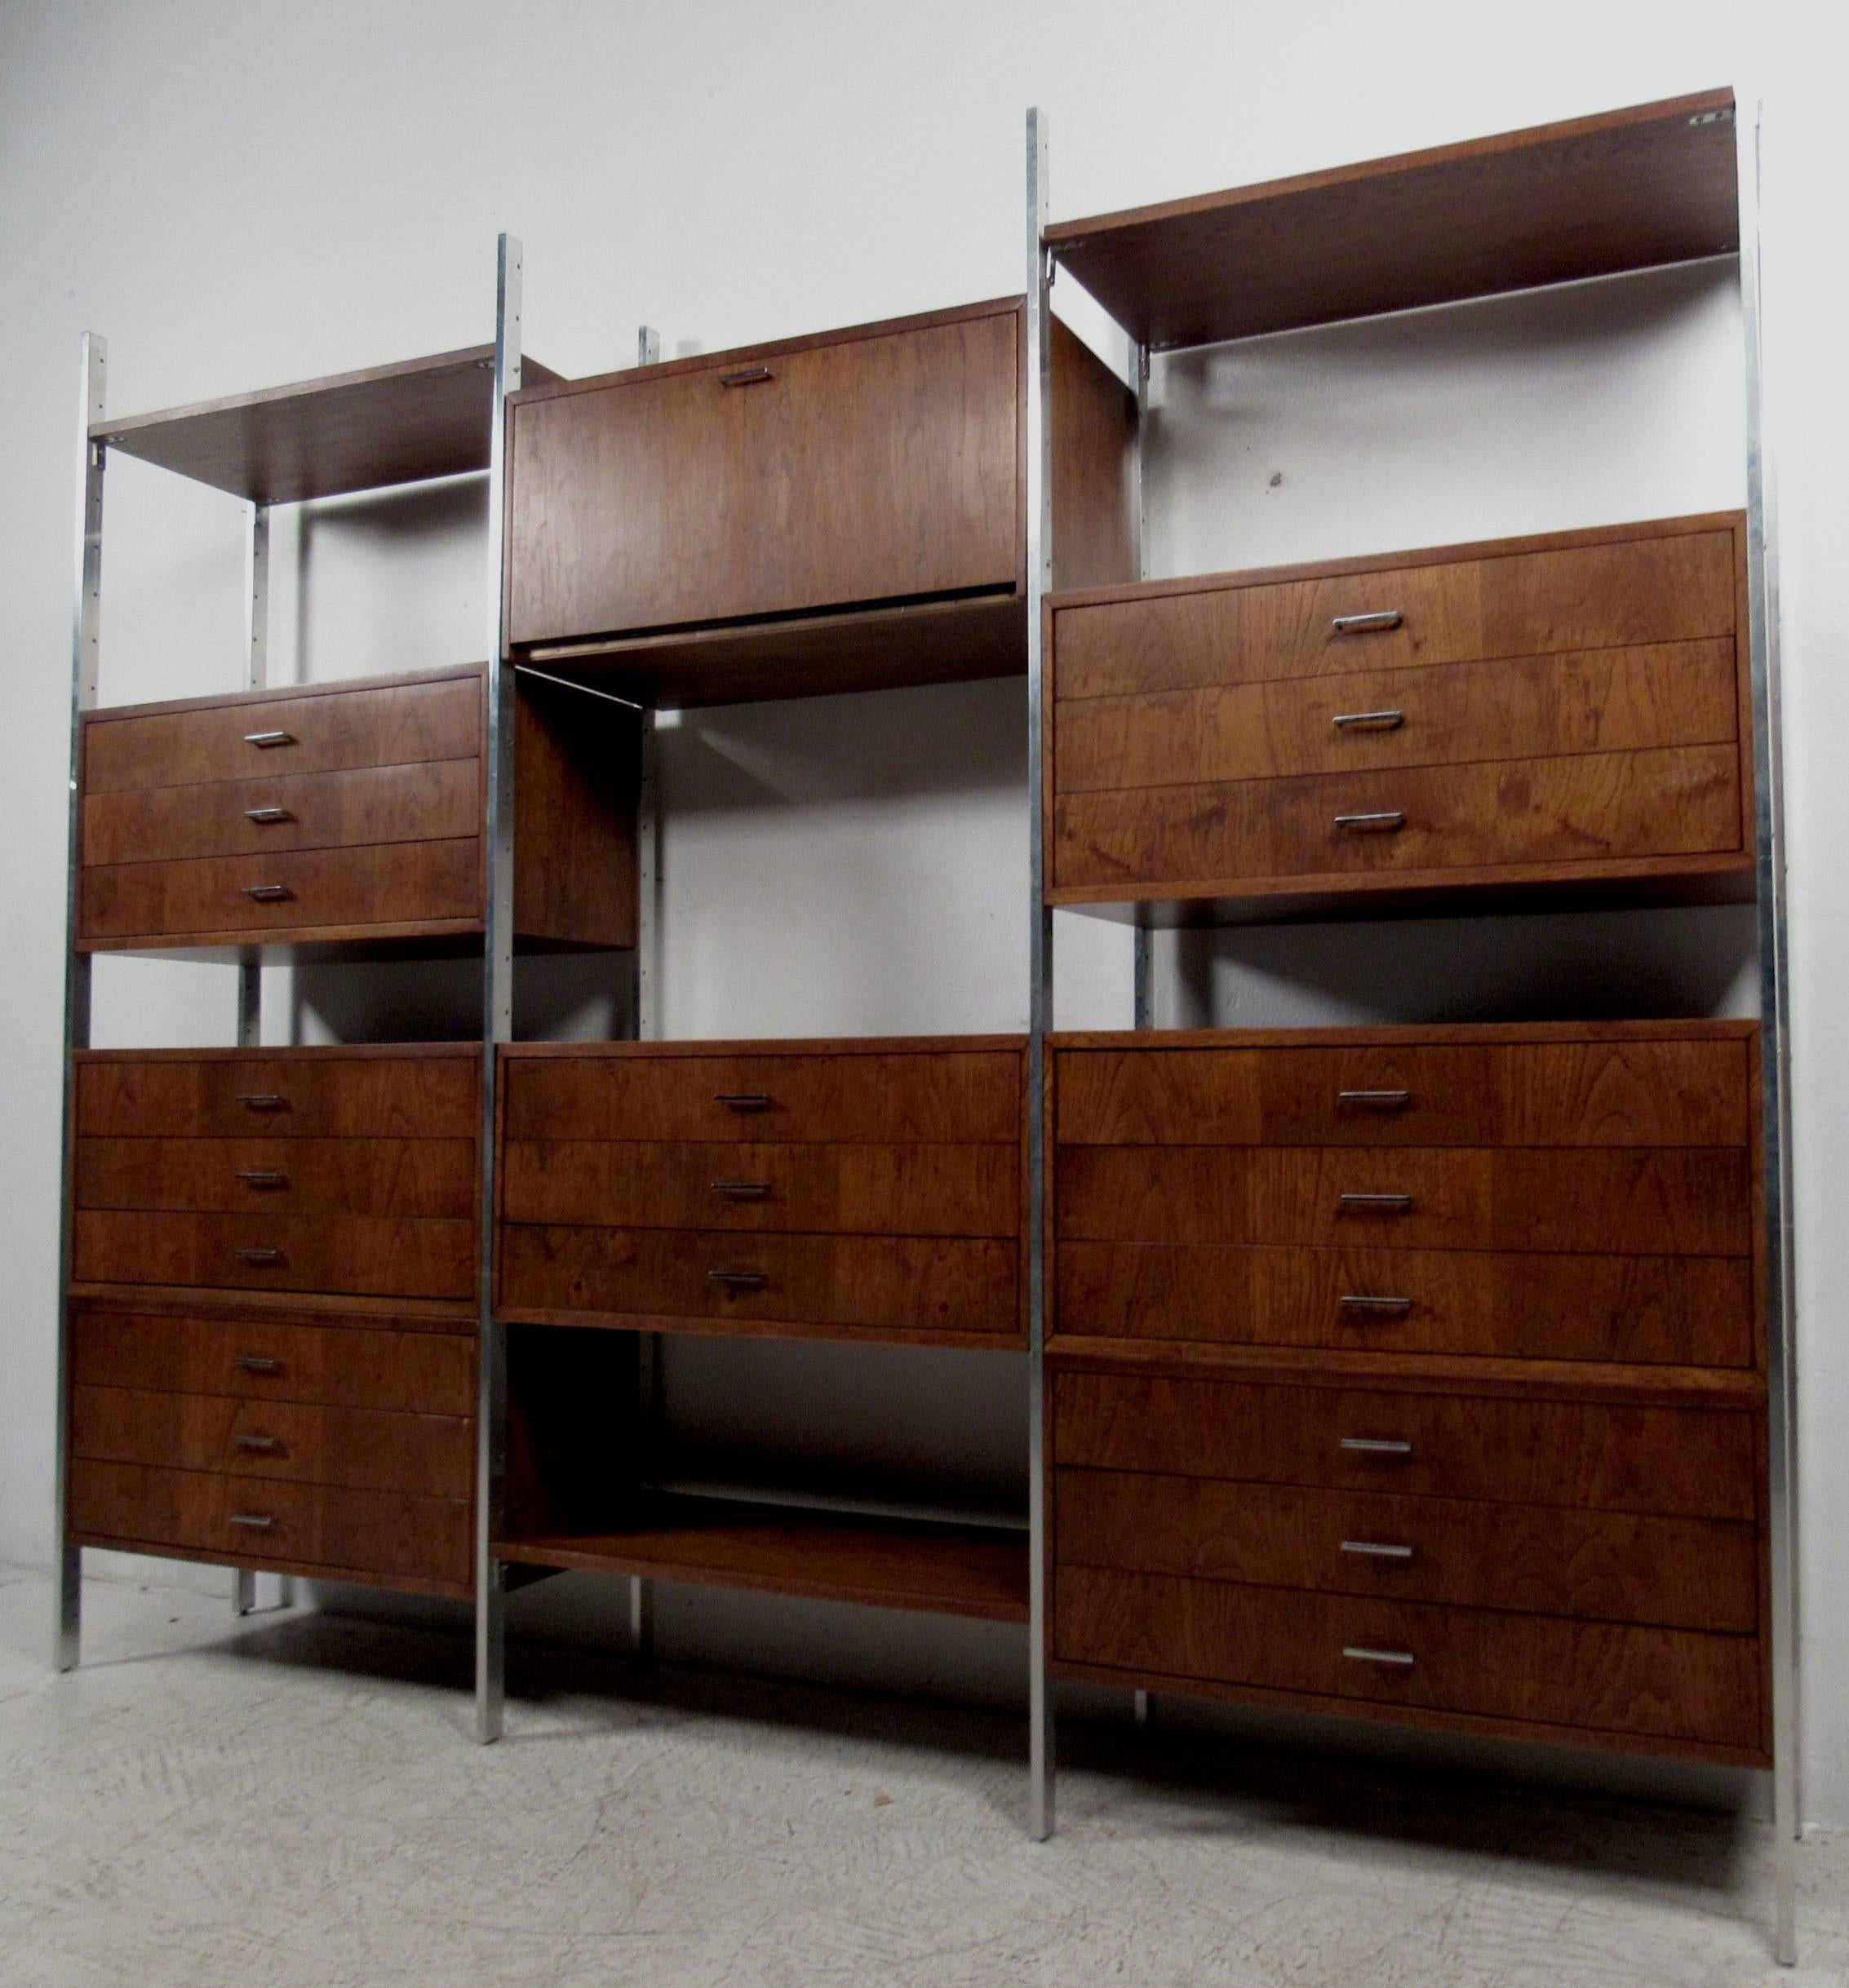 Stylish modular wall unit features vintage-modern design including chrome frame and handles.  Walnut finish and quality mid-century modern construction make this versatile  unit the perfect mix of drawer, cabinet, and shelf storage.
Please confirm